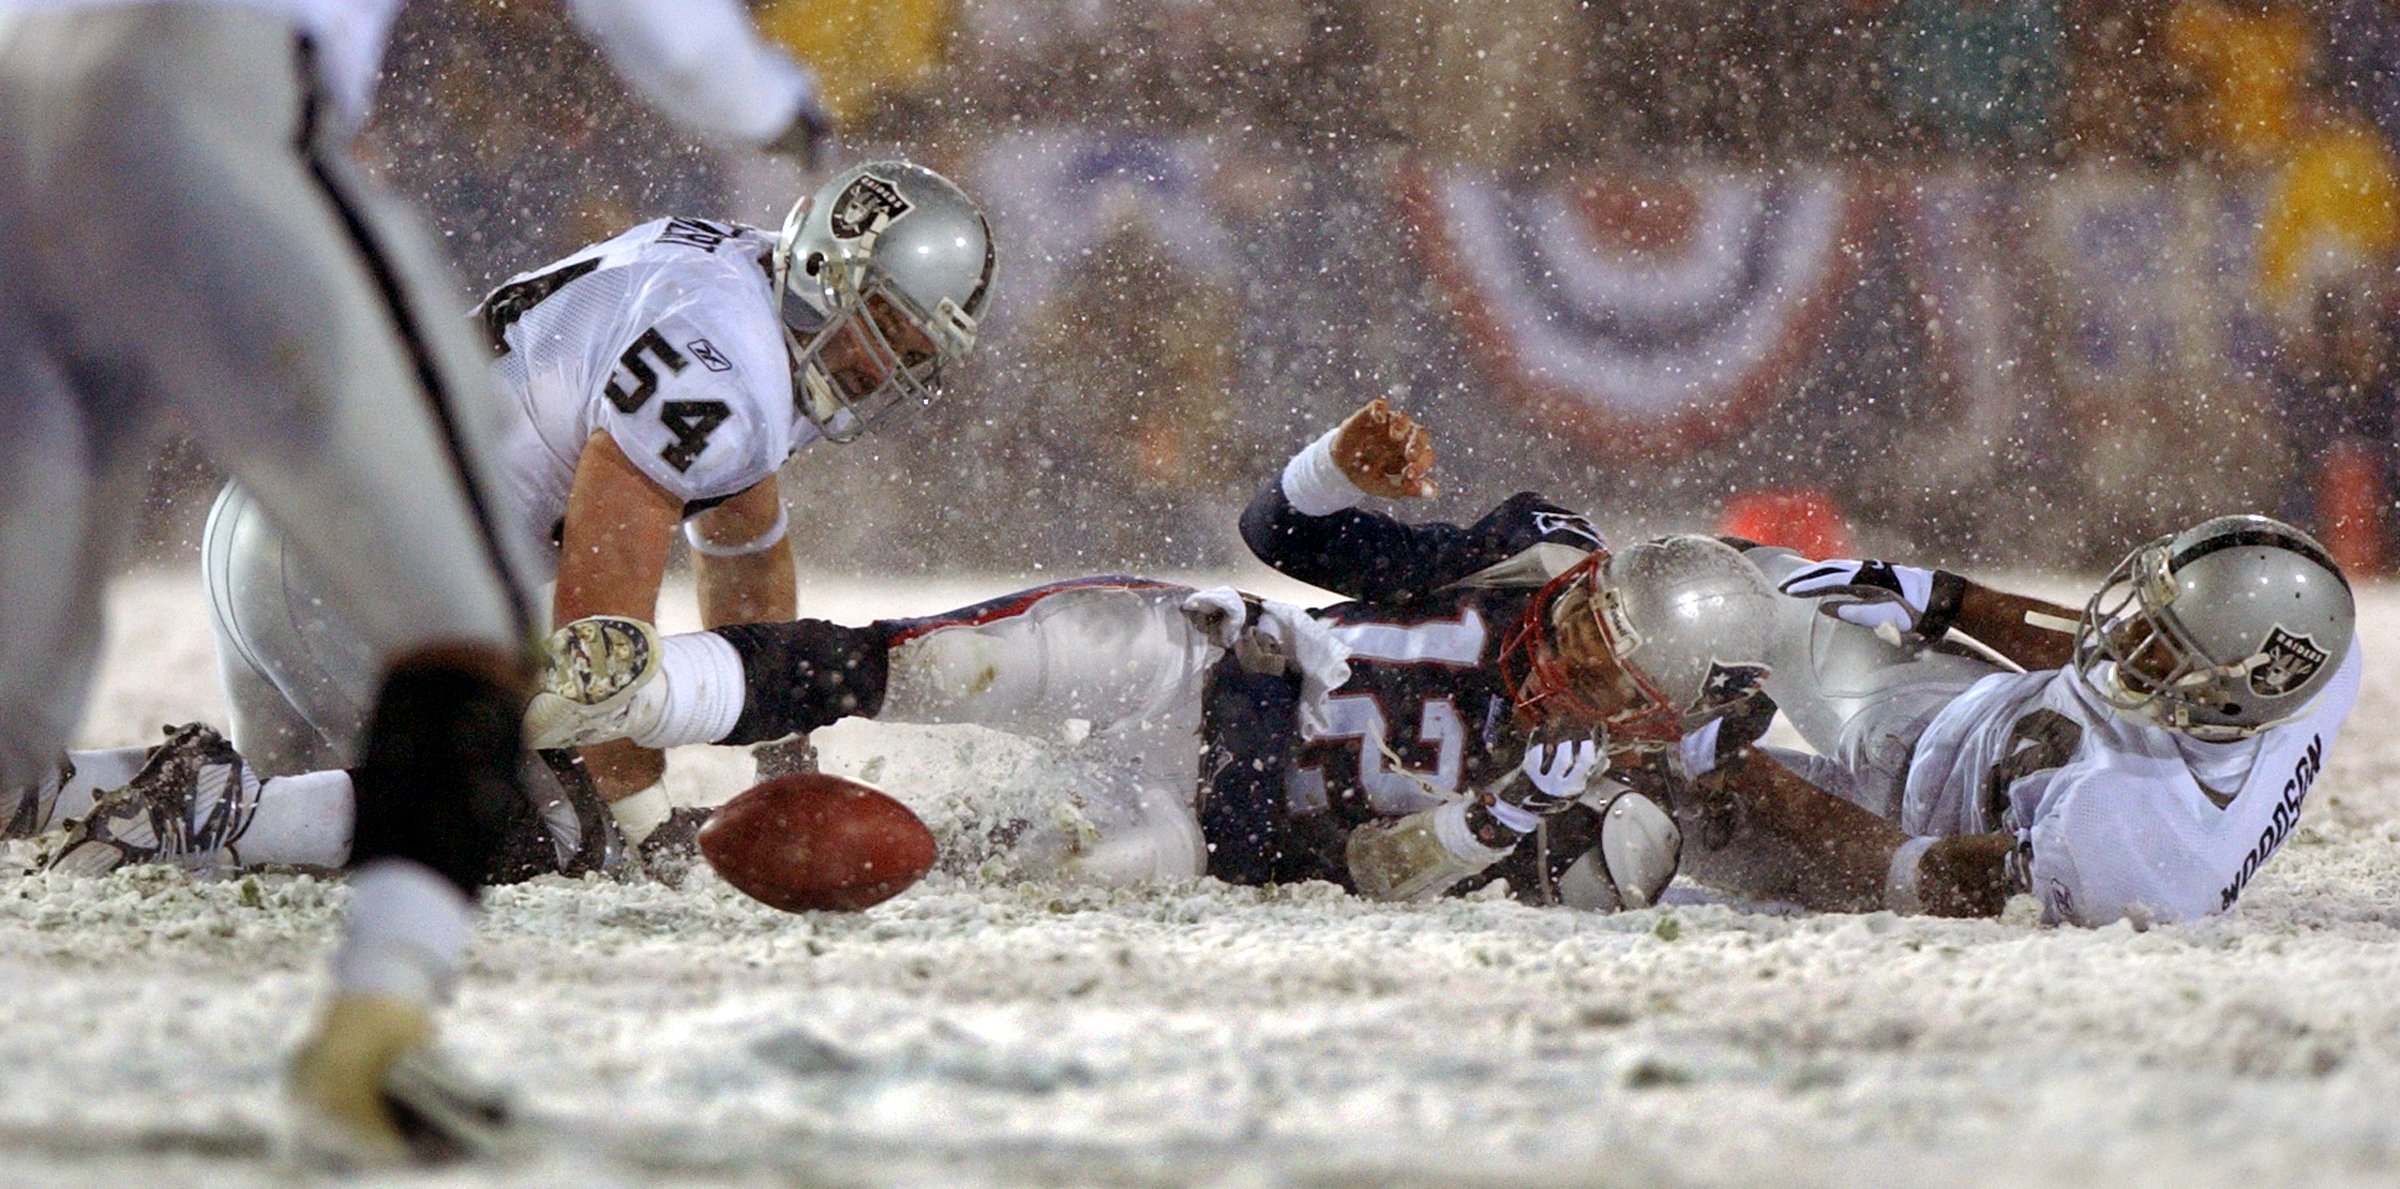 New England Patriots quarterback Tom Brady loses the ball after being hit by the Oakland Raiders Charles Woodson.